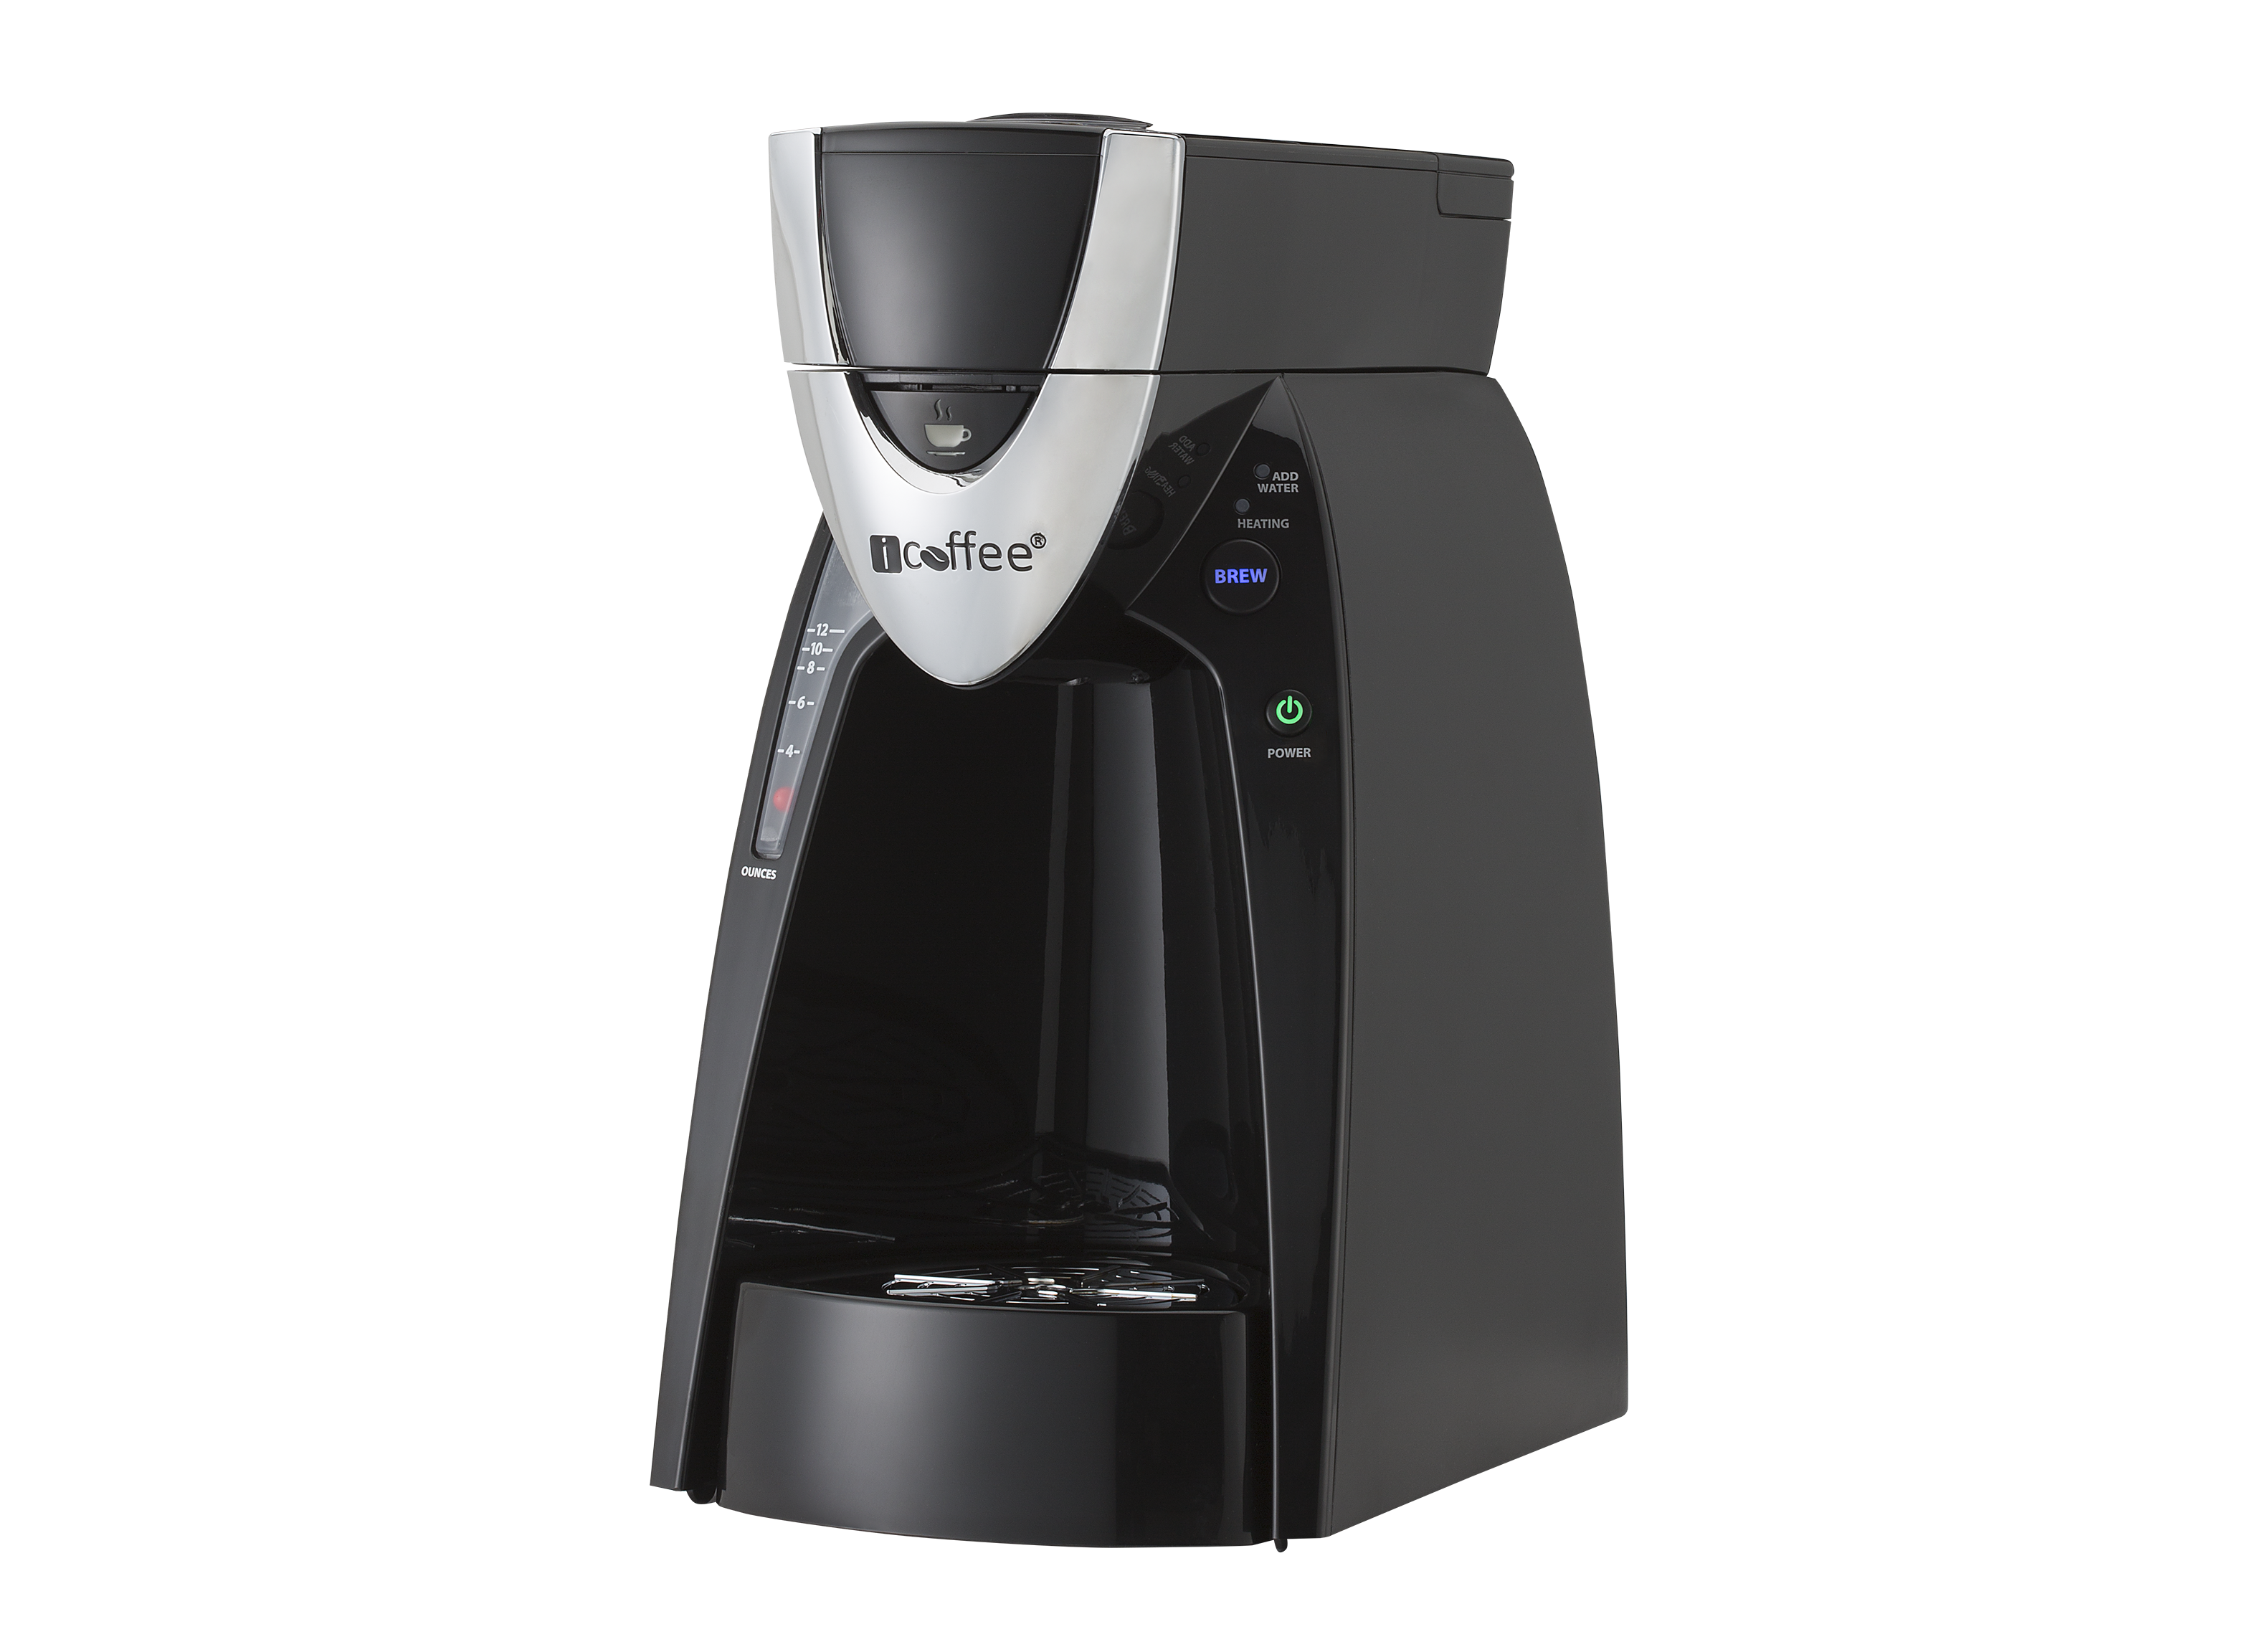 https://crdms.images.consumerreports.org/prod/products/cr/models/383018-podcoffeemakers-icoffee-expressrss100exp.png